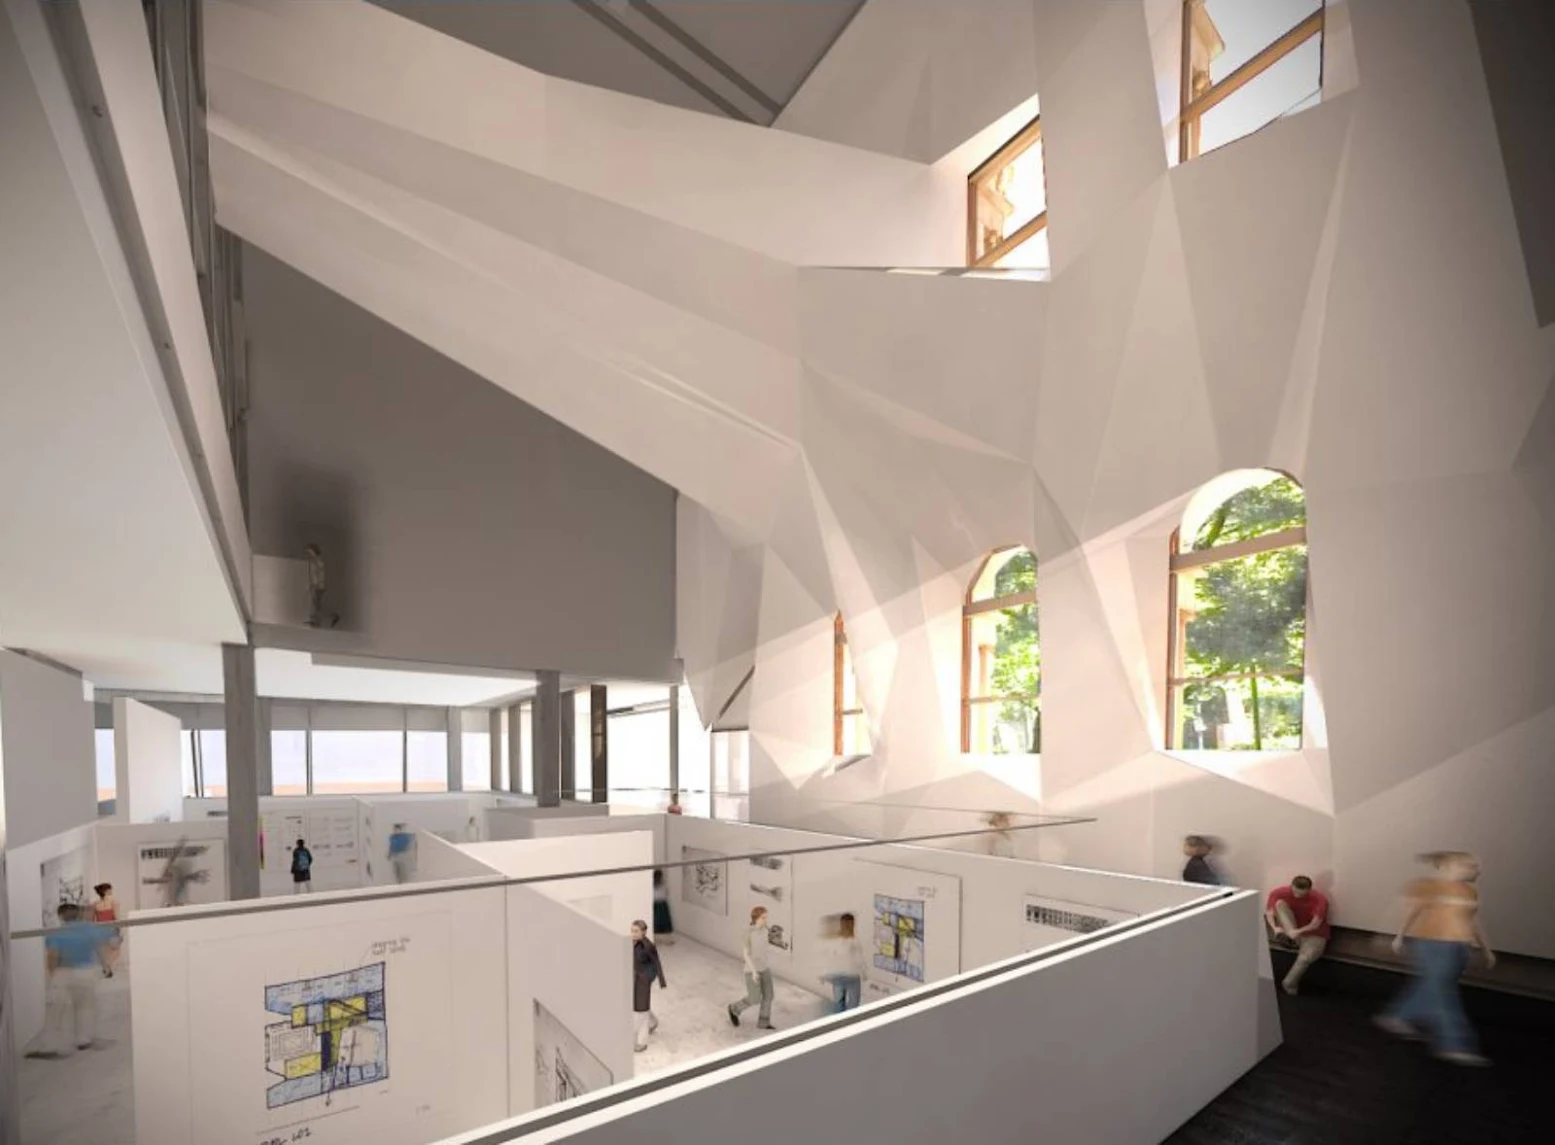 University of Melbourne by JWA and NADAAA